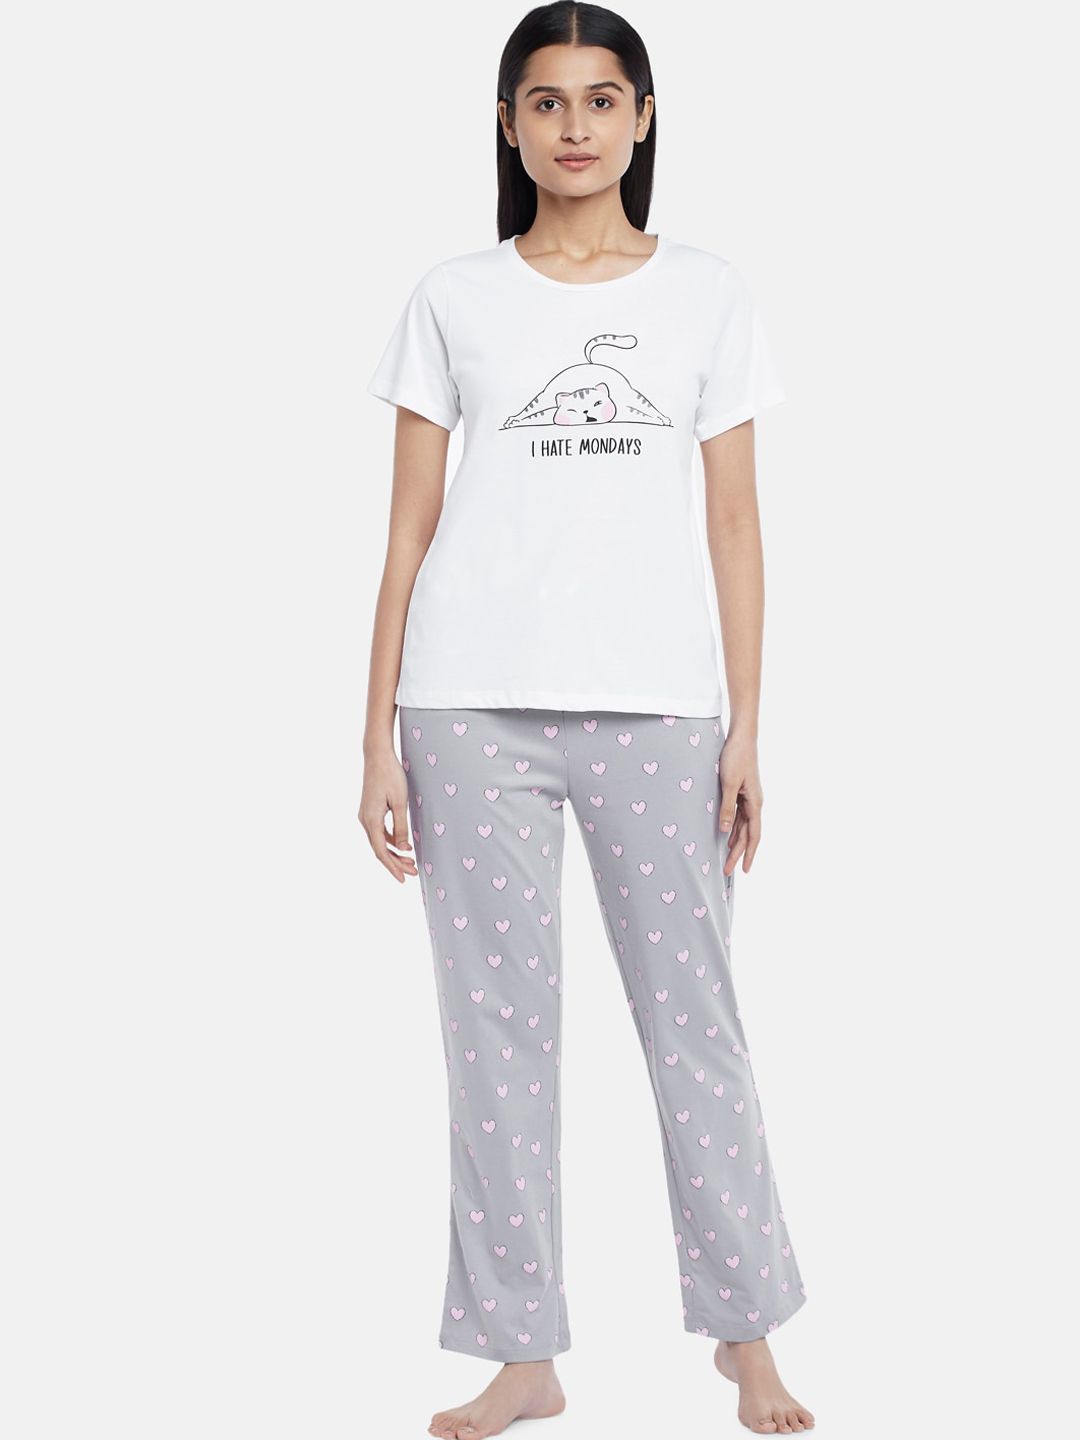 Dreamz by Pantaloons Women White & Grey Printed Night suit Price in India